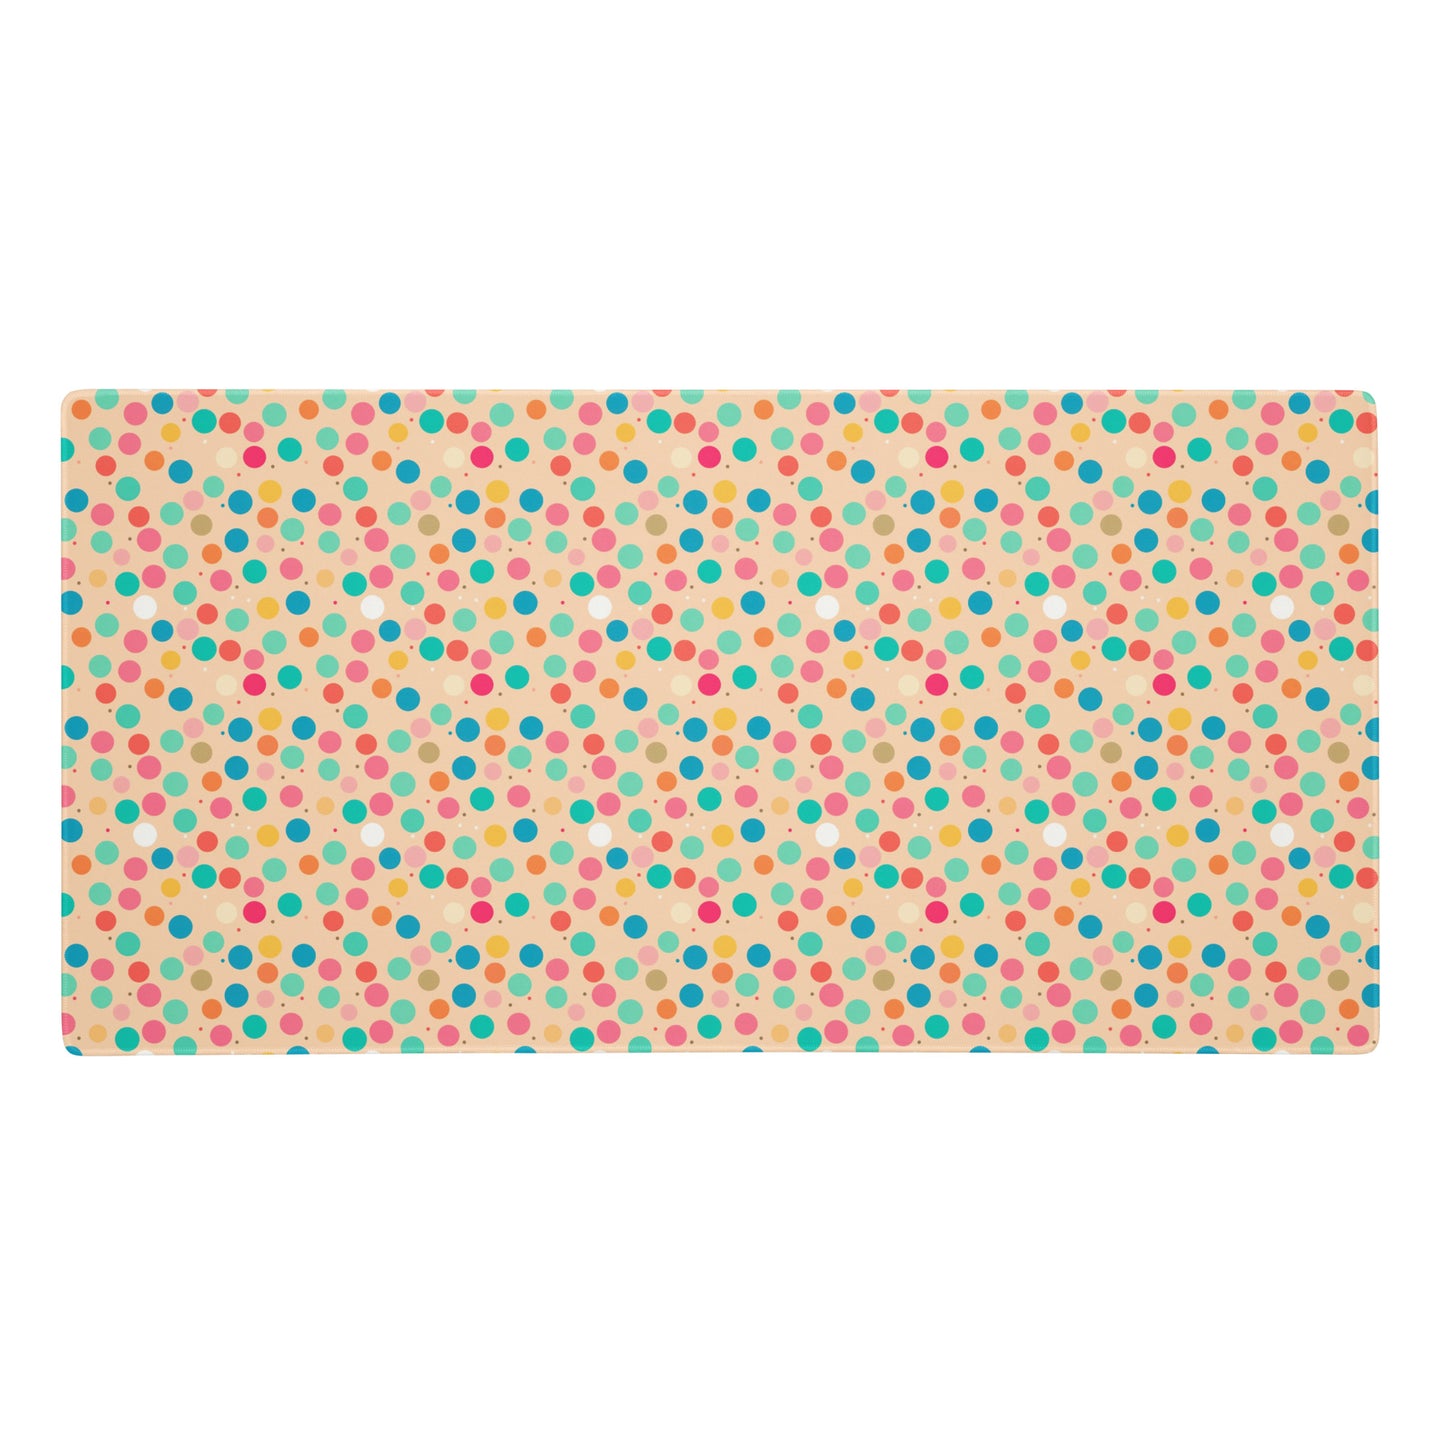 A 36" x 18" desk pad with a colorful polka dot pattern.